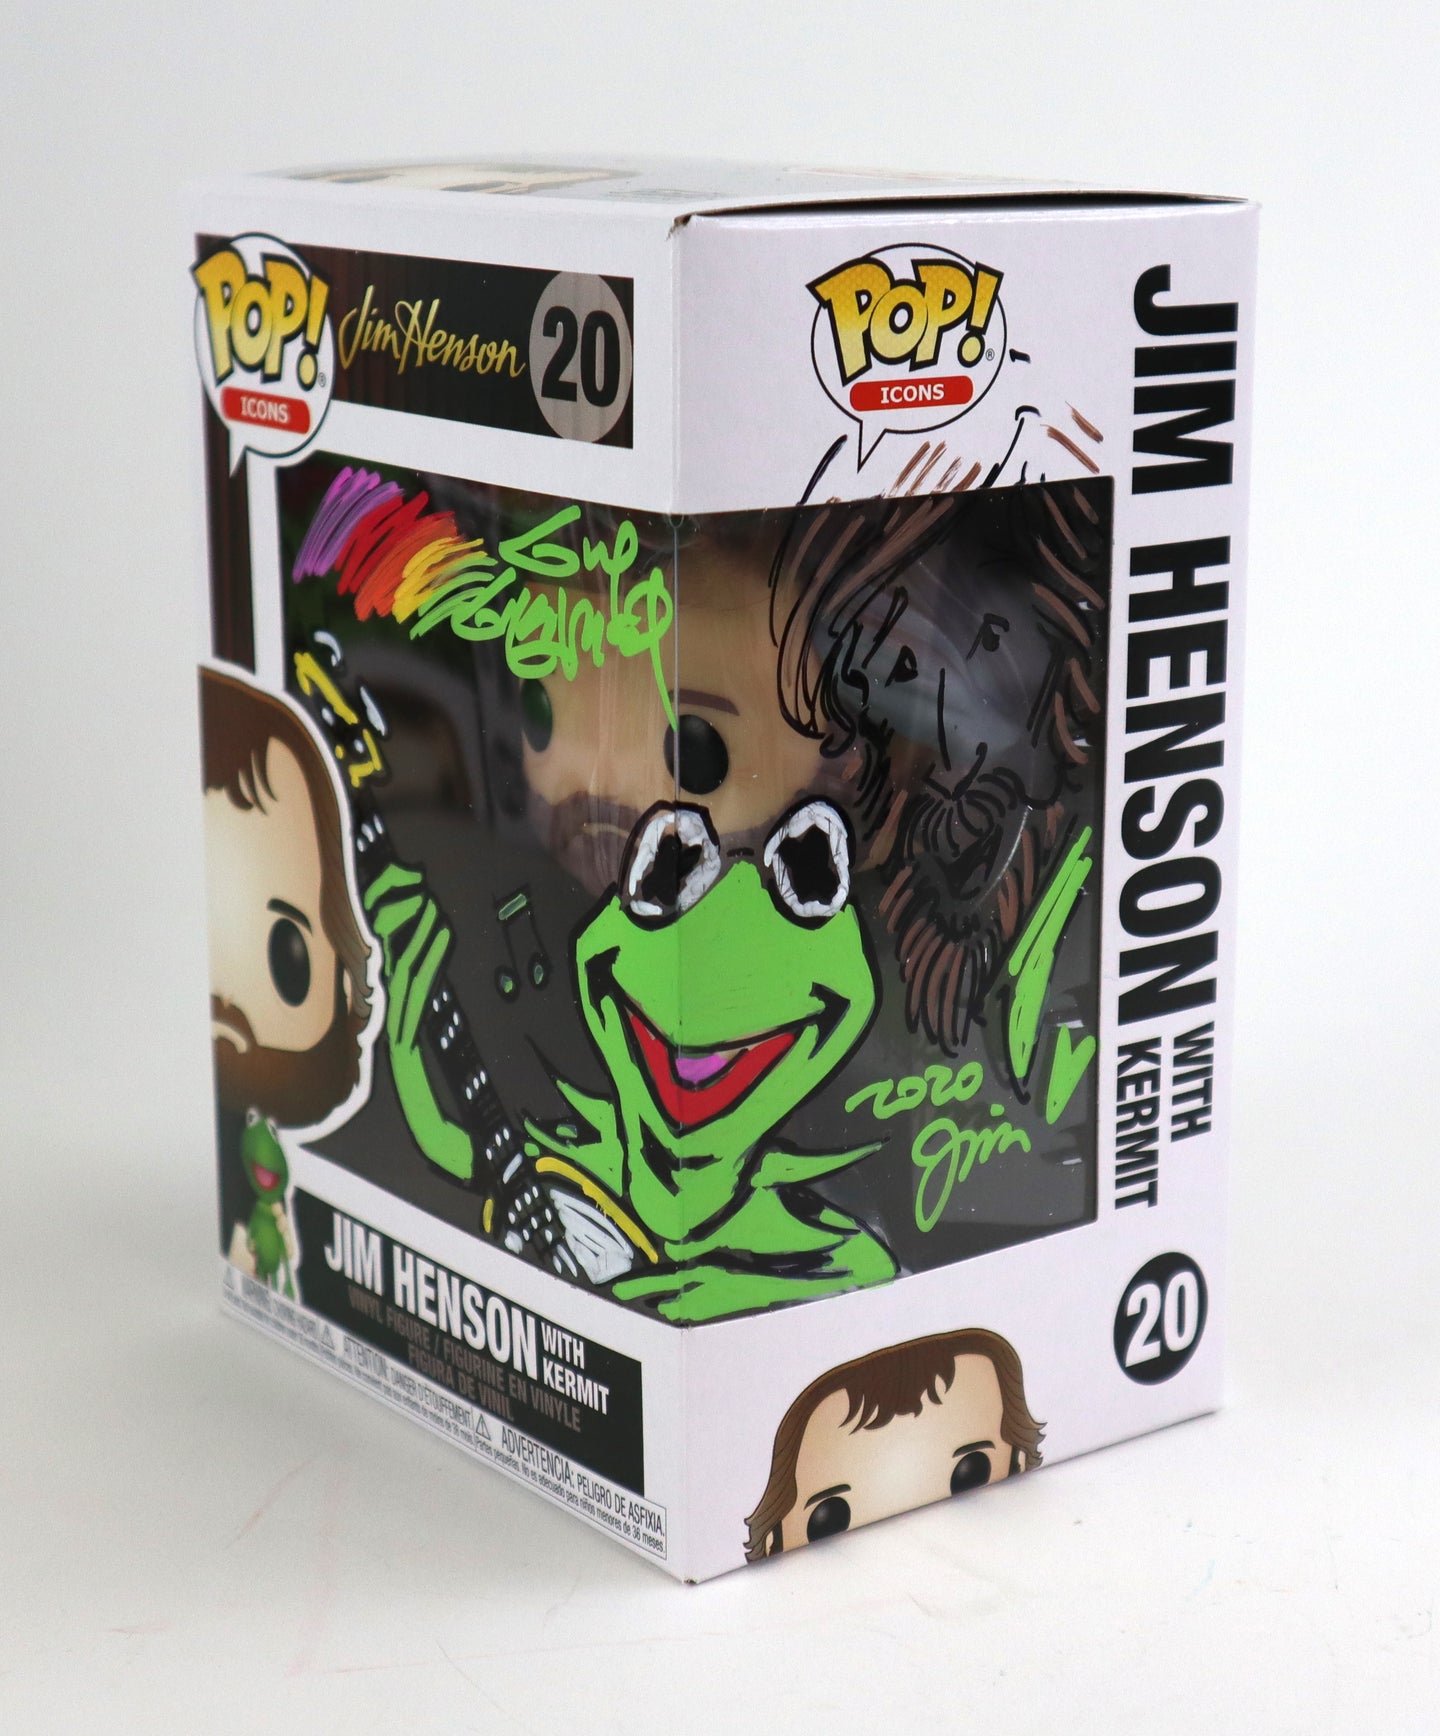 Jim Henson with Kermit Remark Funko POP #20  - Signed by Guy Gilchrist